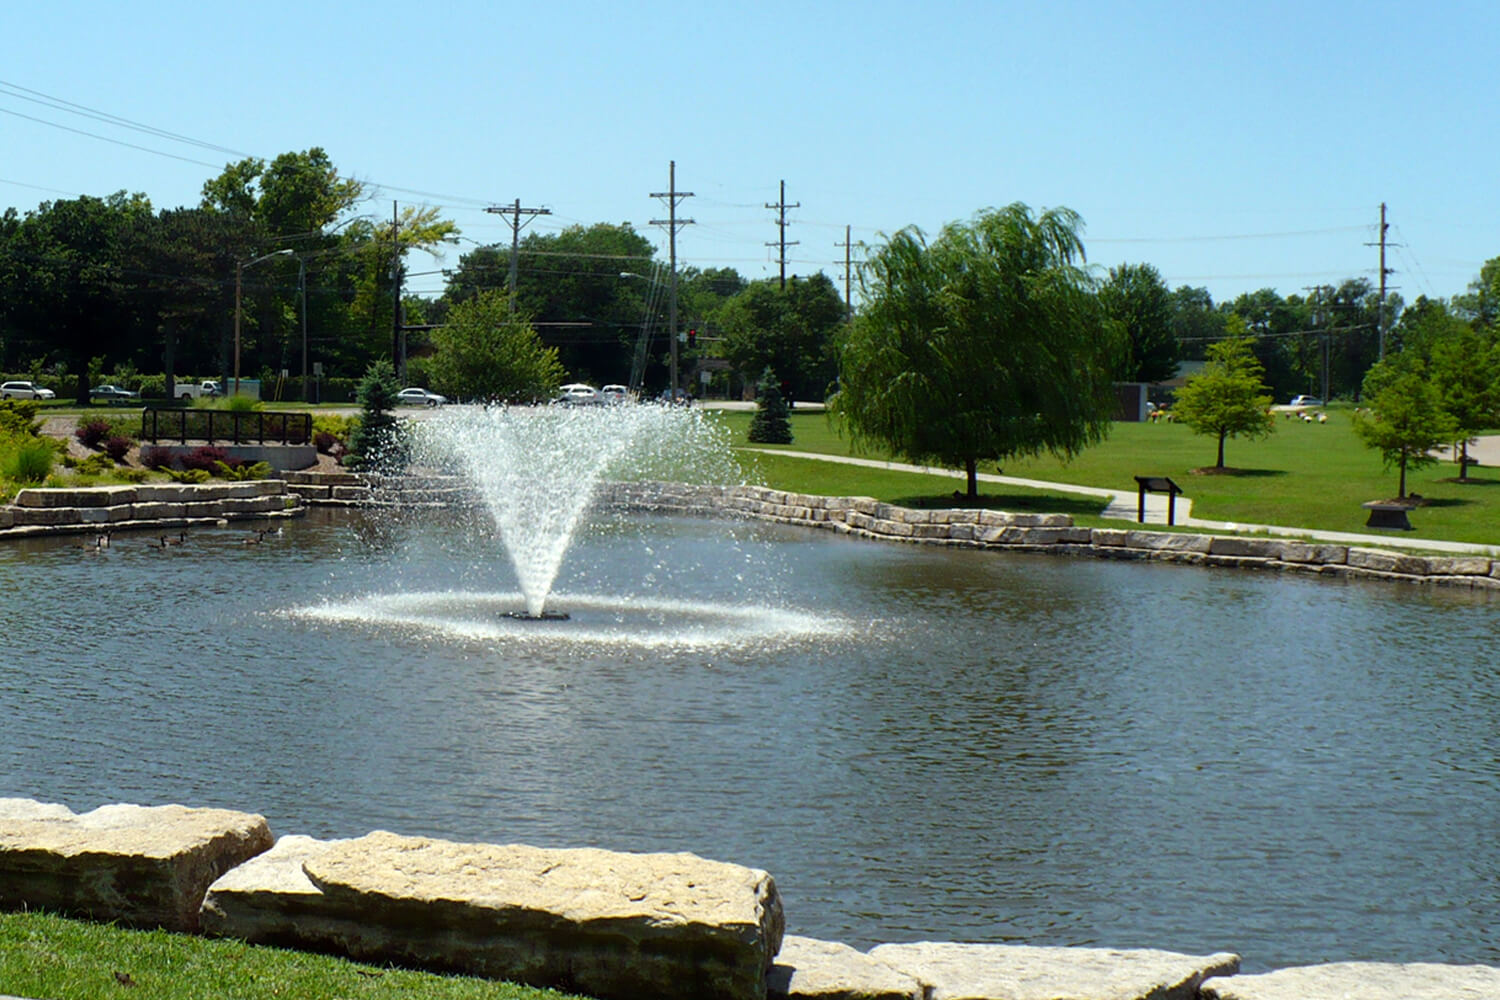 One of Otterbine's Gemini Aerating Fountains in a park